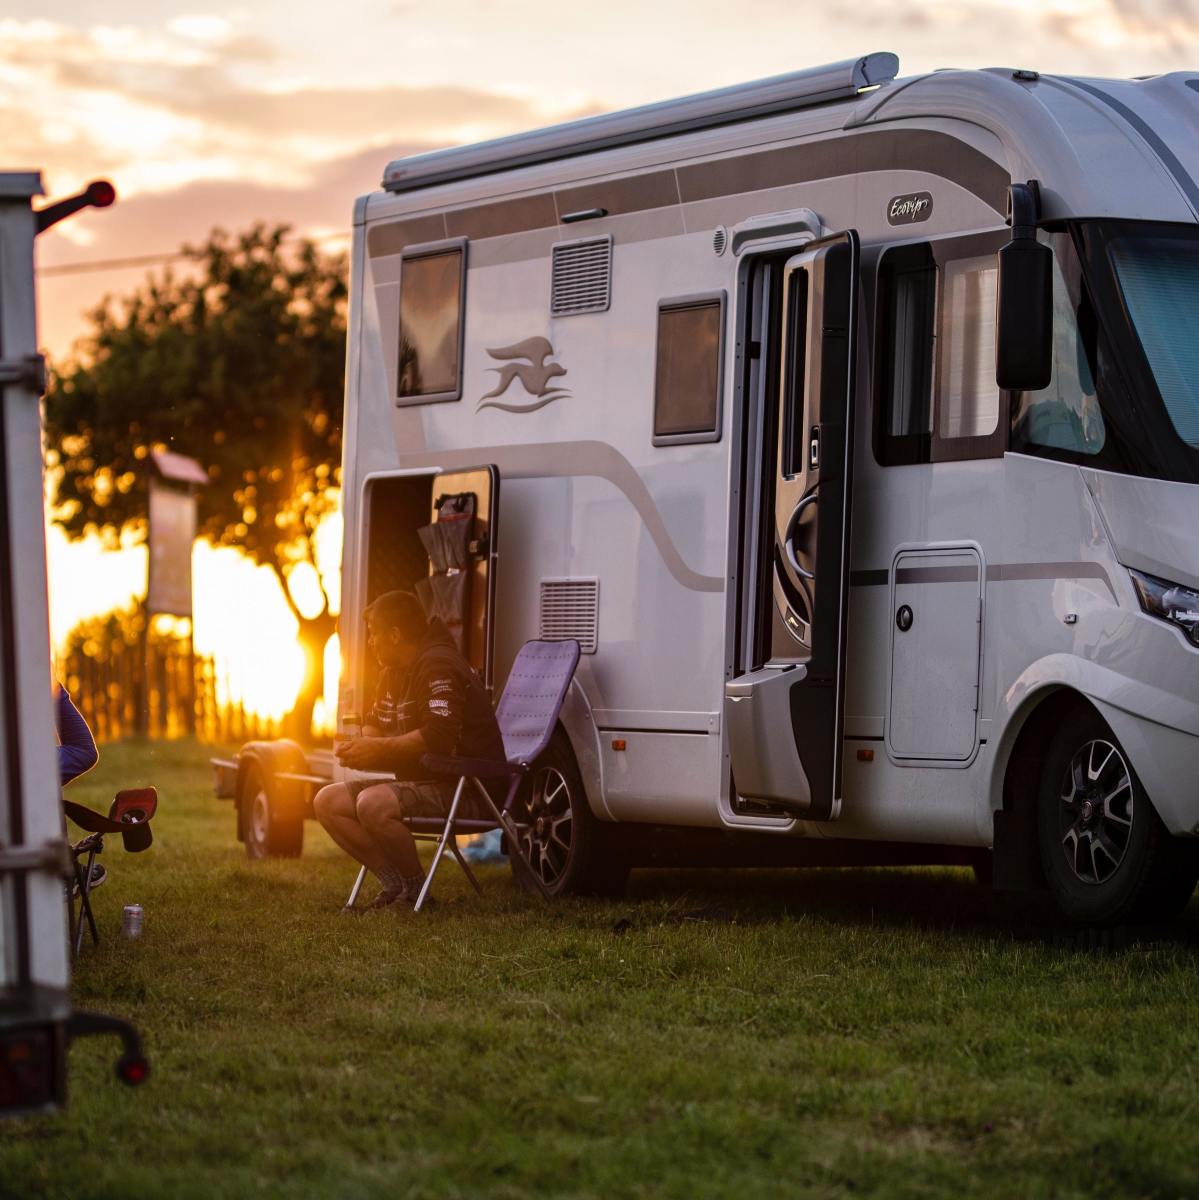 How to Save on RV Camping Costs (12 Money-Saving Tips)